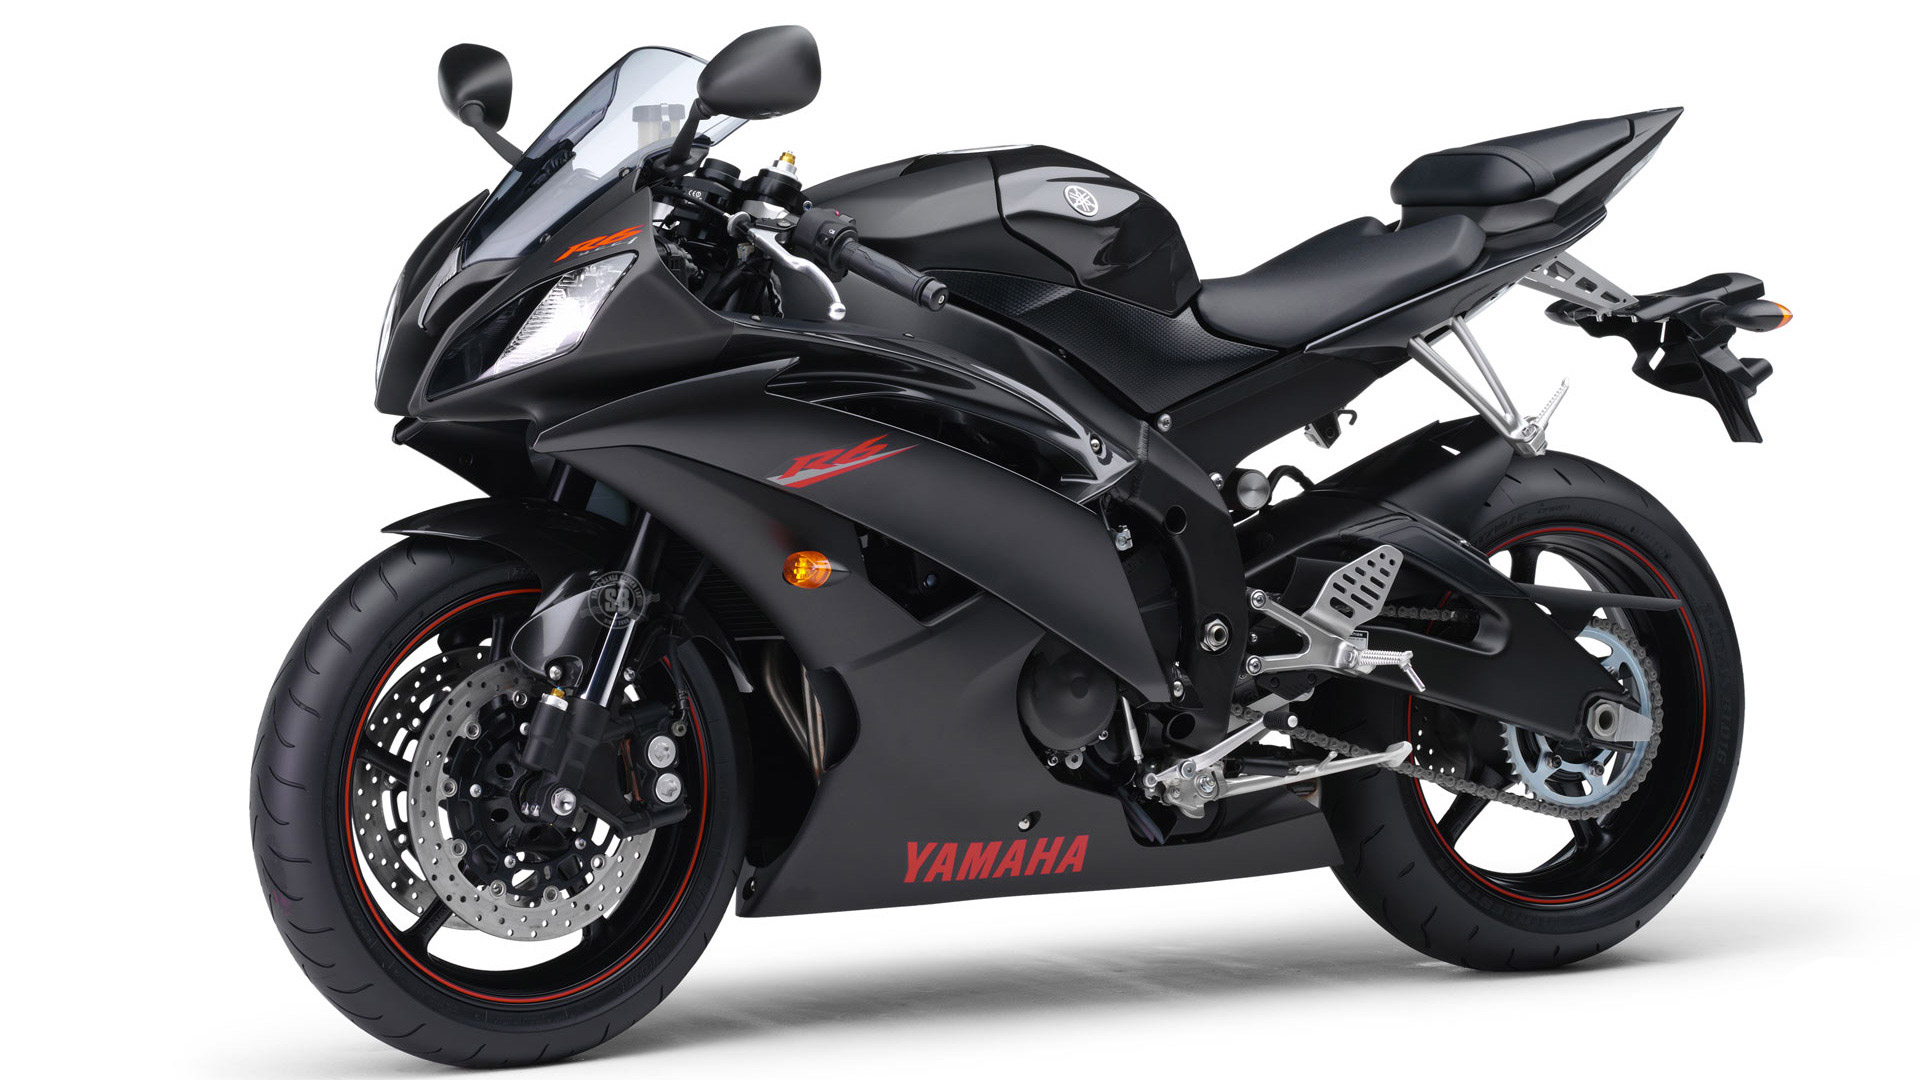 Free download Yamaha Motorcycles Wallpapers in HD 4K and wide sizes